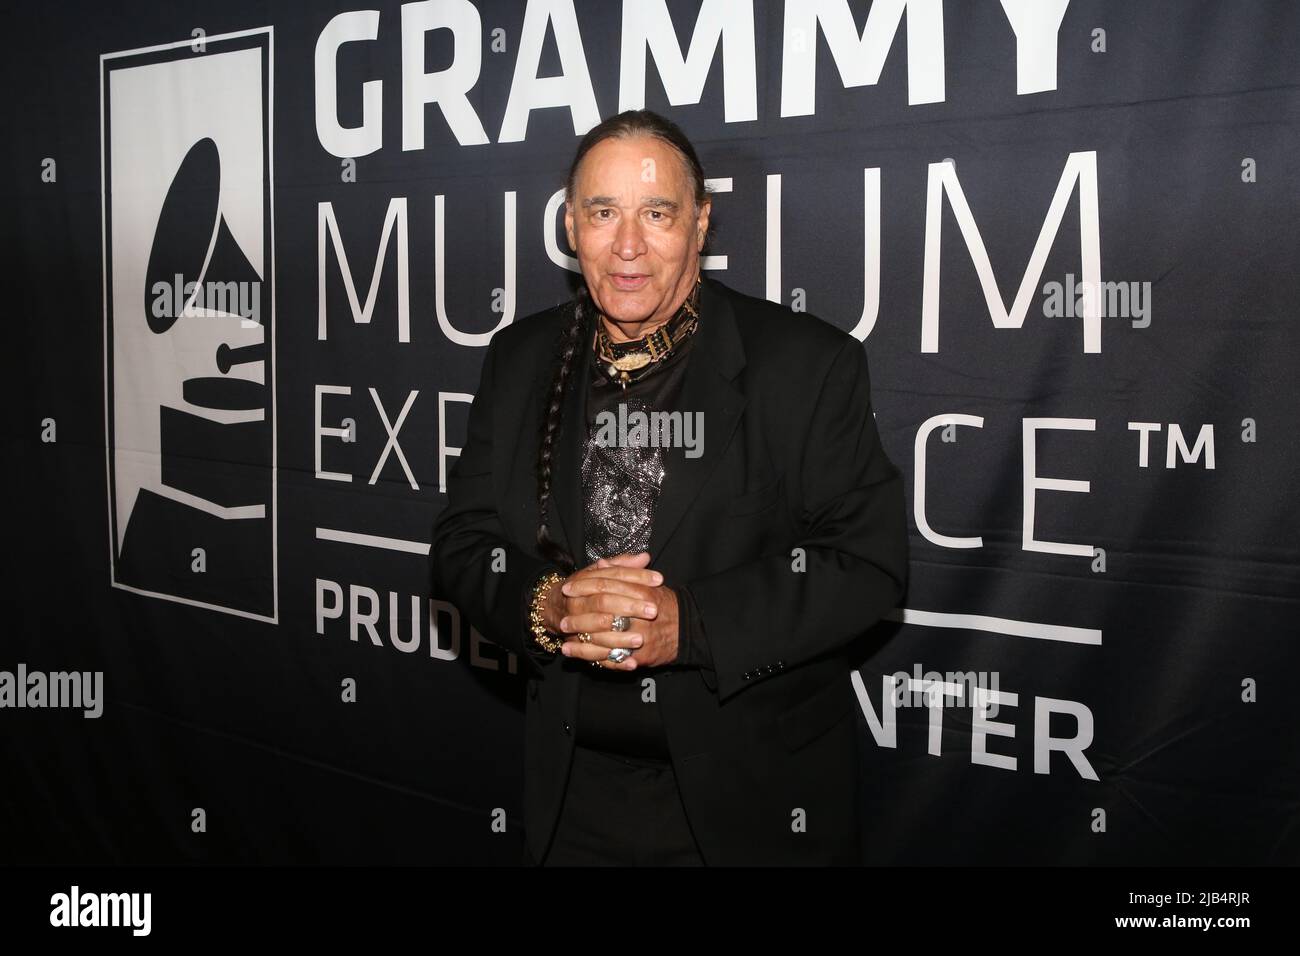 Ernie Paniccioli attends GRAMMY Museum Experience at Prudential Center  kick-off event to Black Music Month with Photographer Ernie Paniccioli new  photo exhibit, A Hip-Hop Life: Five Decades of Hip-Hop Music, Art, And